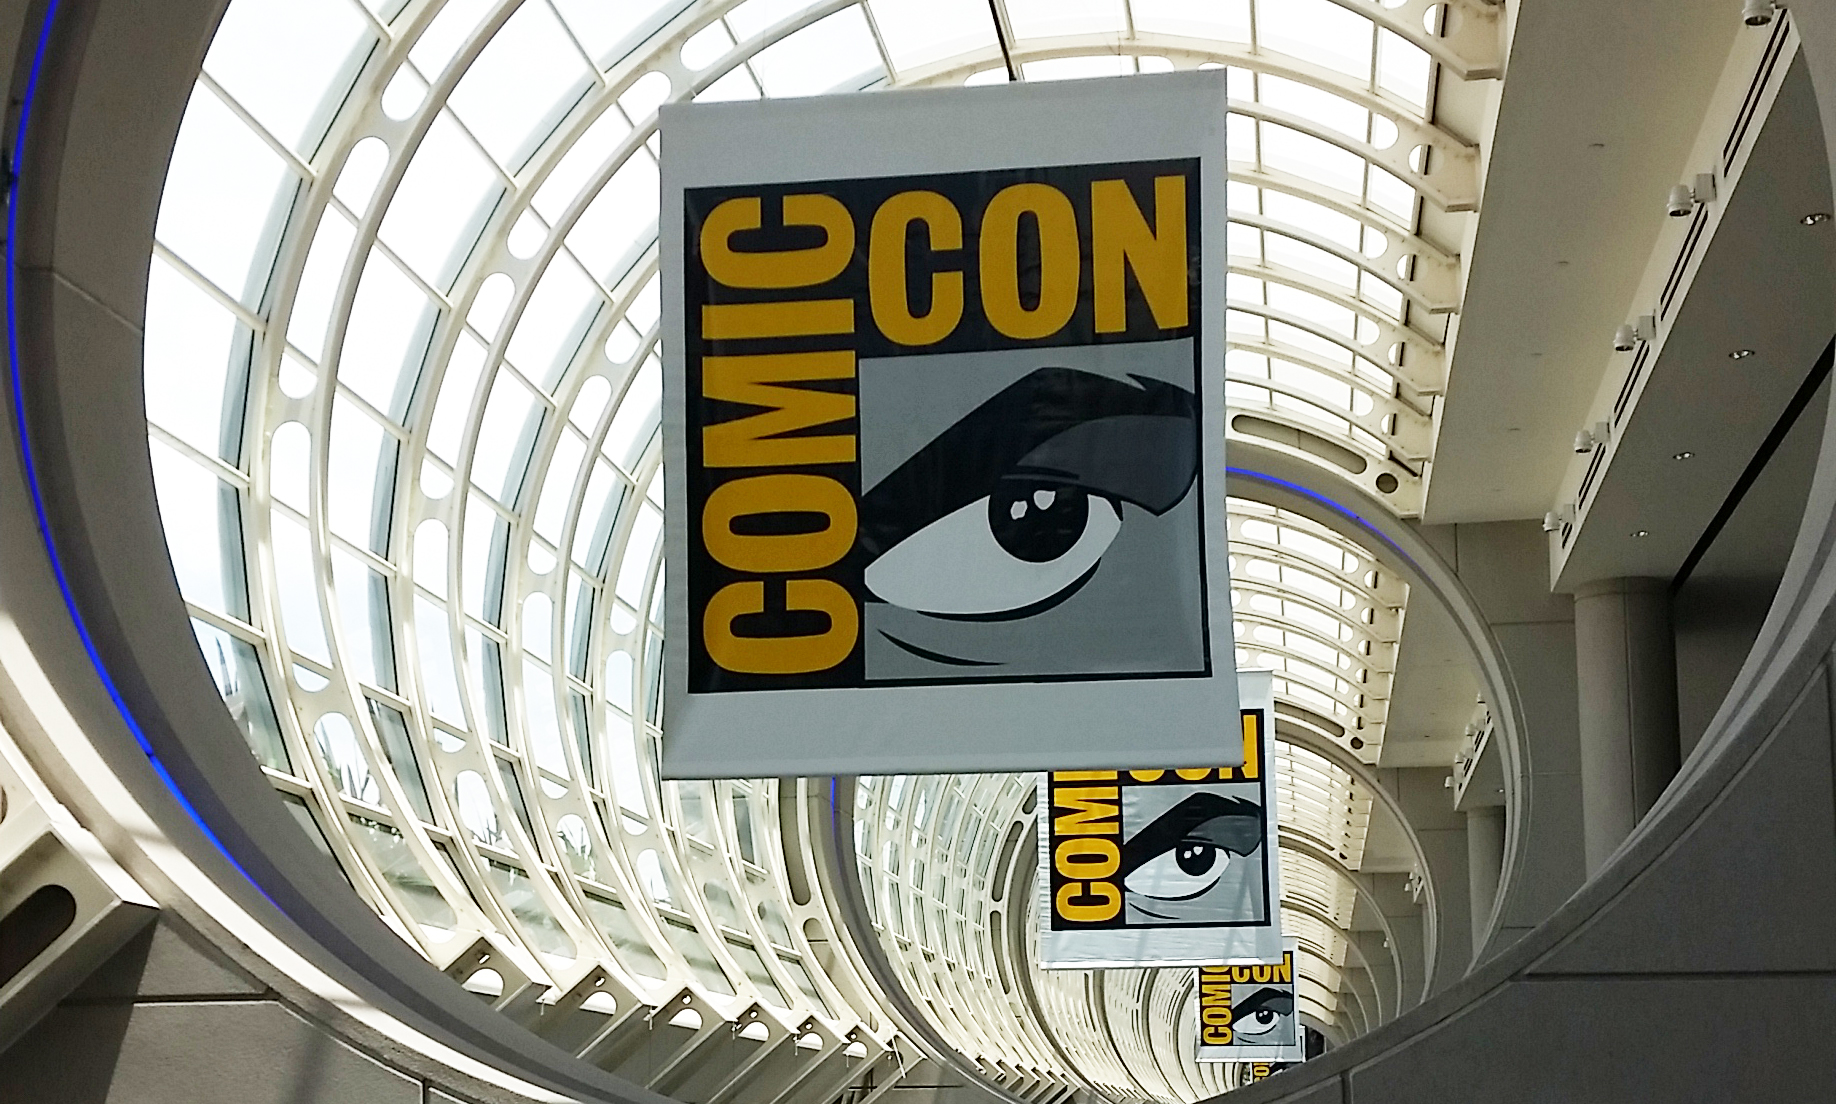 Comic-Con 2016: When and Where Will It Be Held?